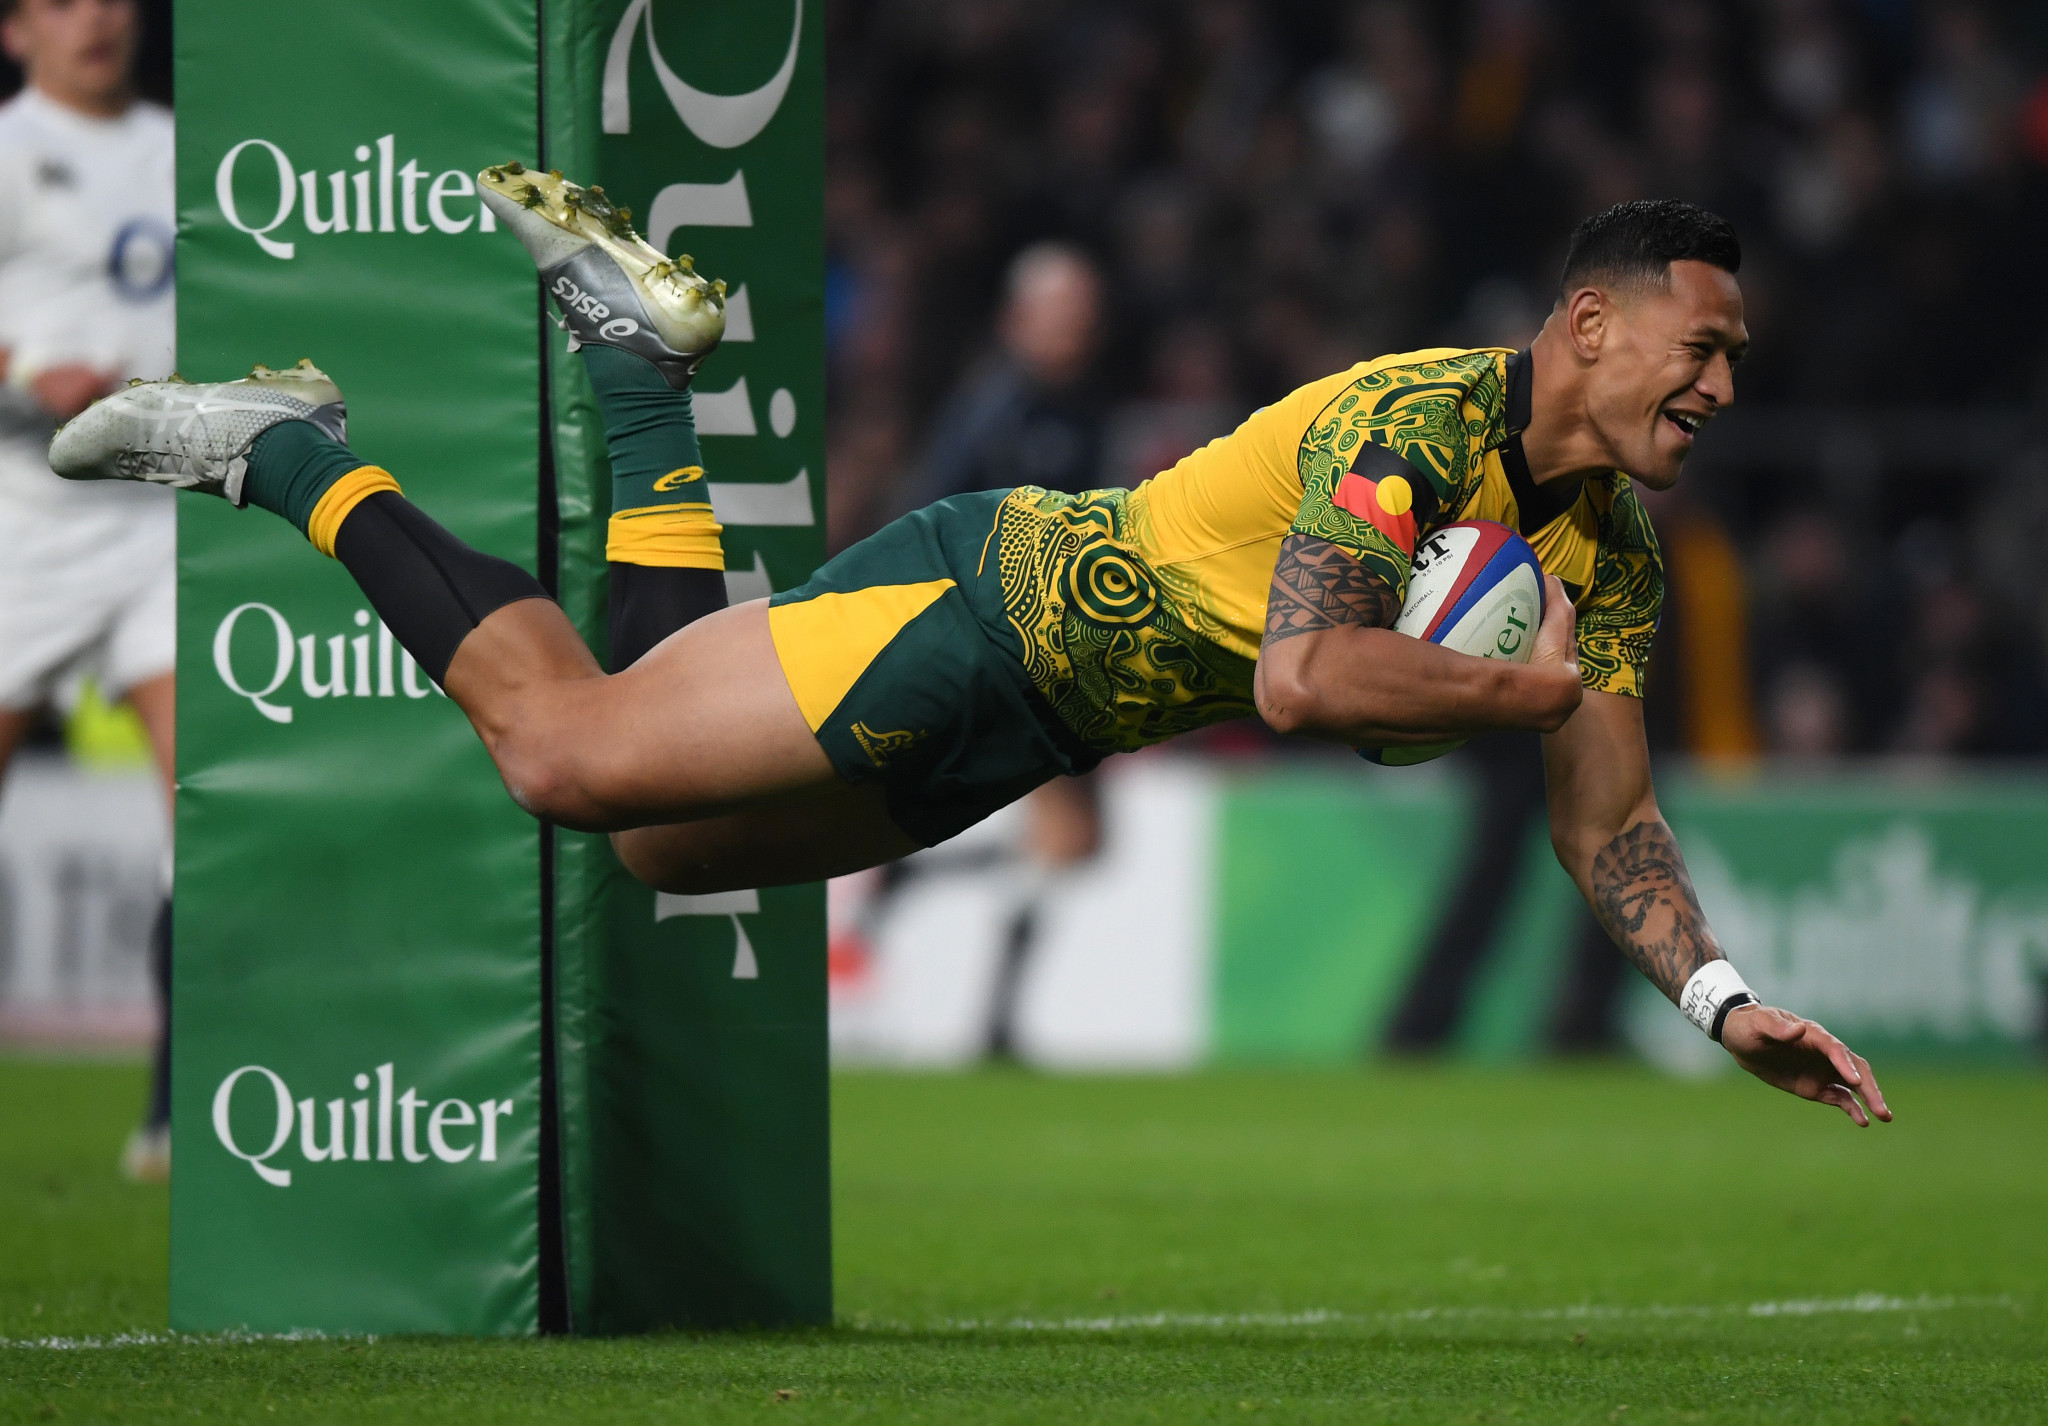 Israel Folau was one of the key players in the Australian rugby union squad before his sacking ©Getty Images